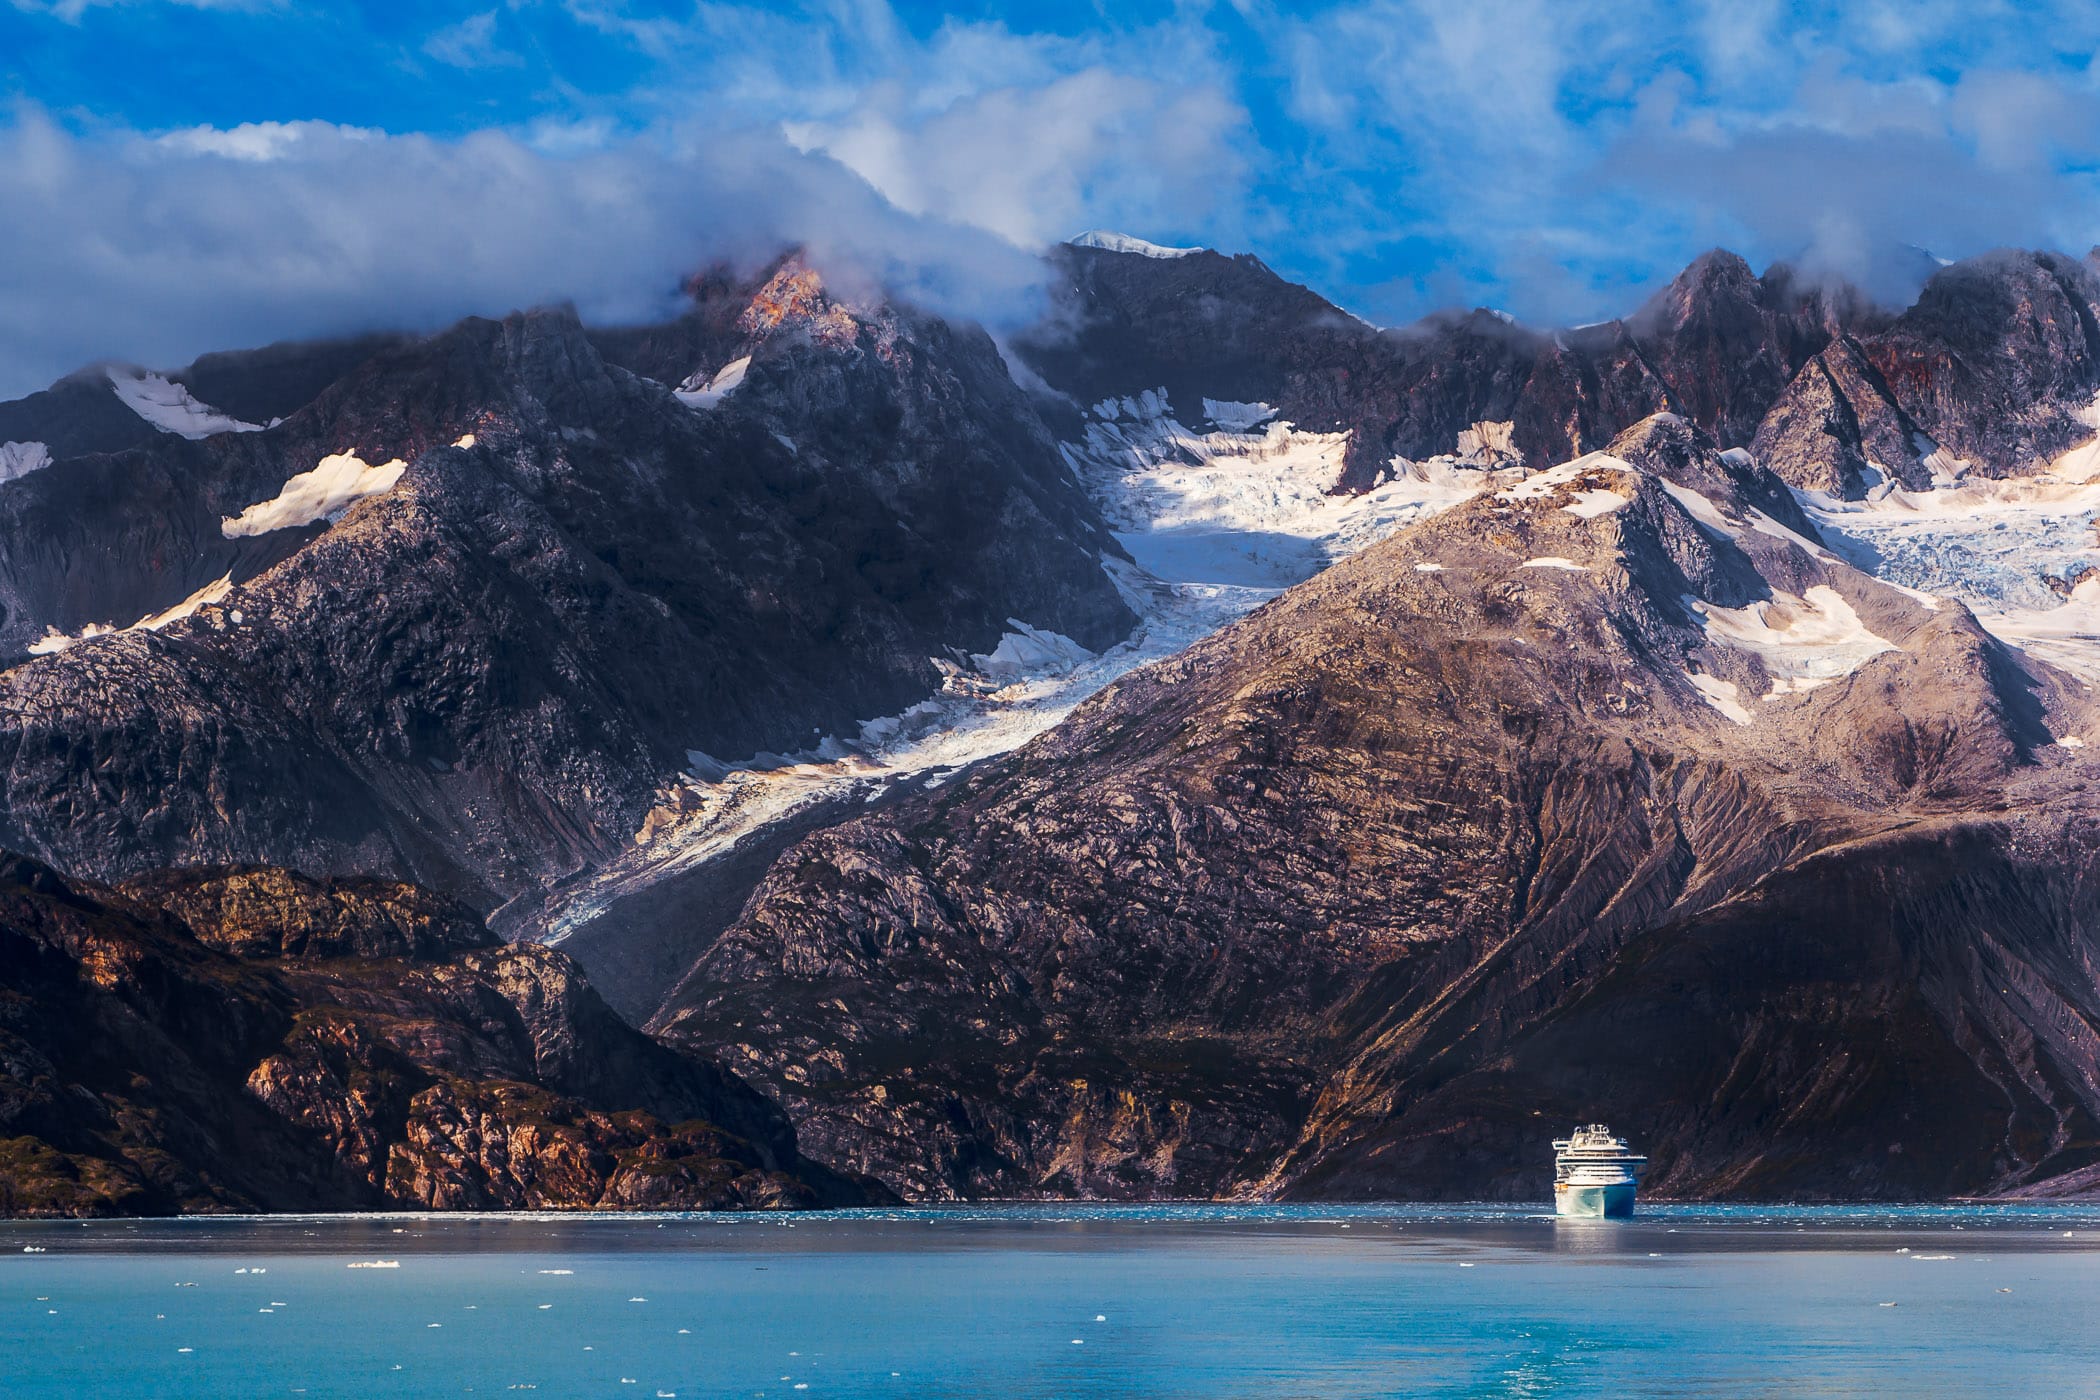 The cruise ship Sapphire Princess is dwarfed by the mountainous landscape of Alaska's Glacier Bay.